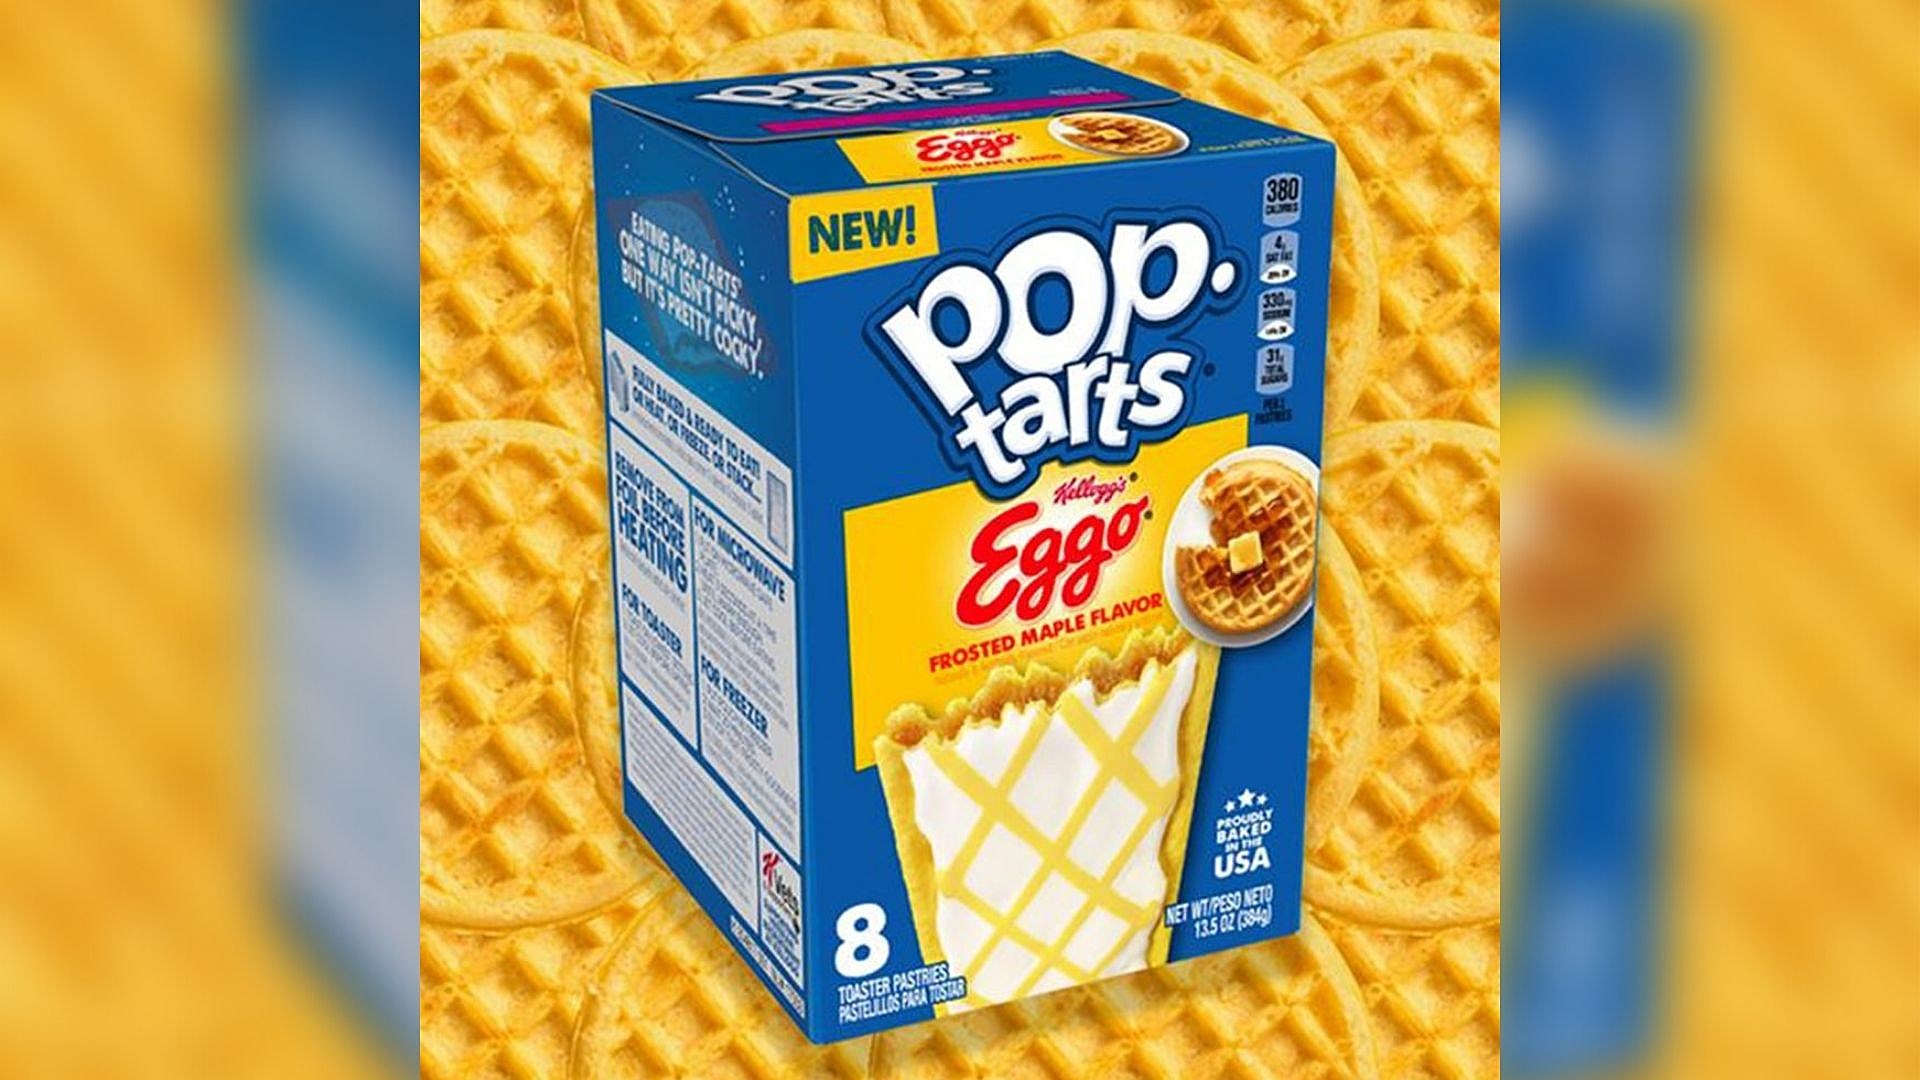 Pop-Tarts and Eggo Waffle Are Teaming Up